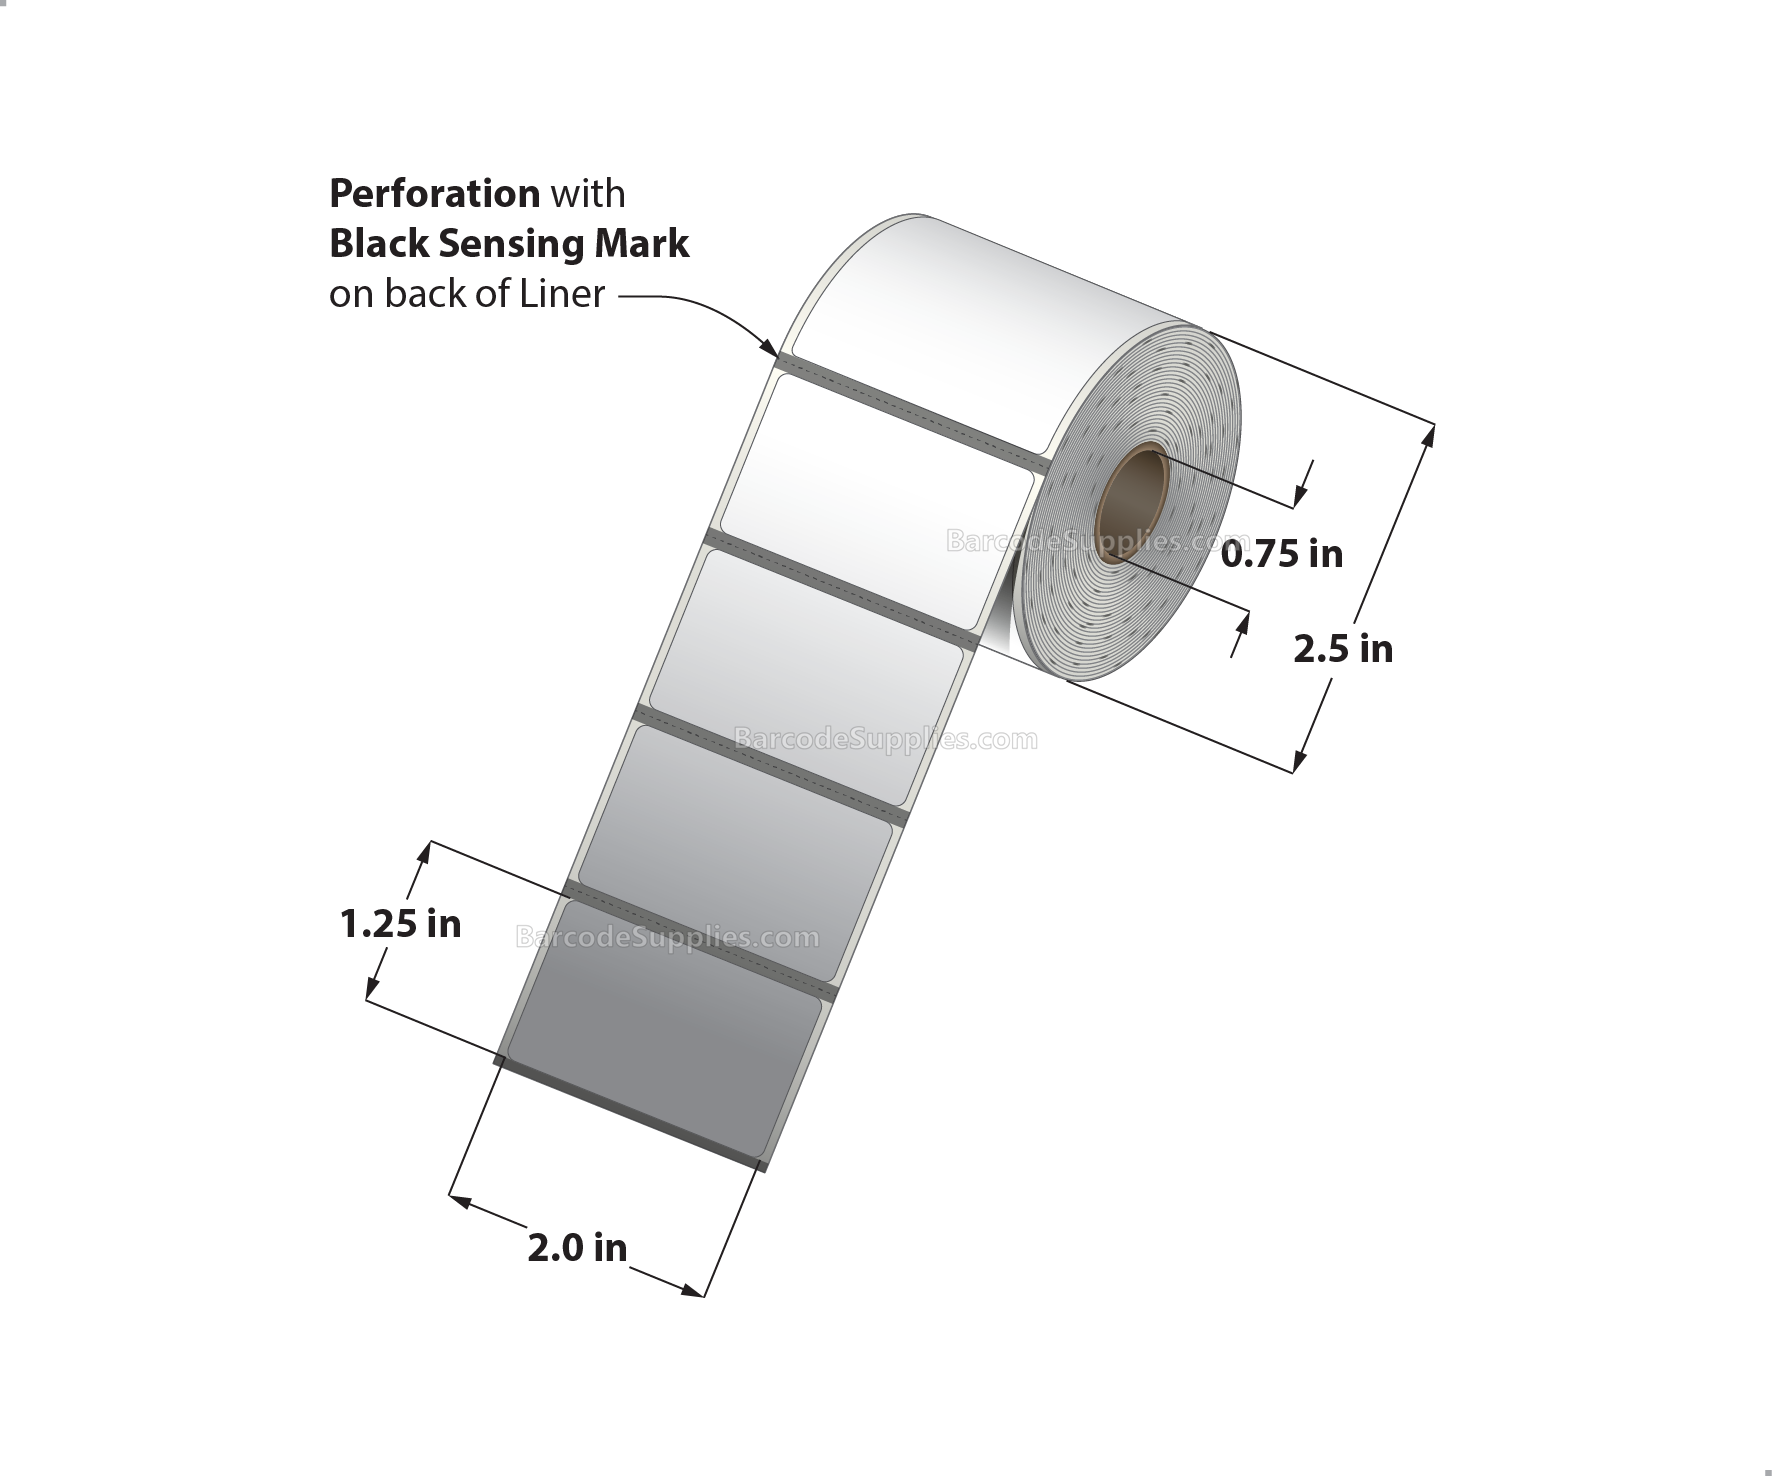 2 x 1.25 Direct Thermal White Labels With Acrylic Adhesive - Perforated - 460 Labels Per Roll - Carton Of 36 Rolls - 16560 Labels Total - MPN: RD-2-125-460-075